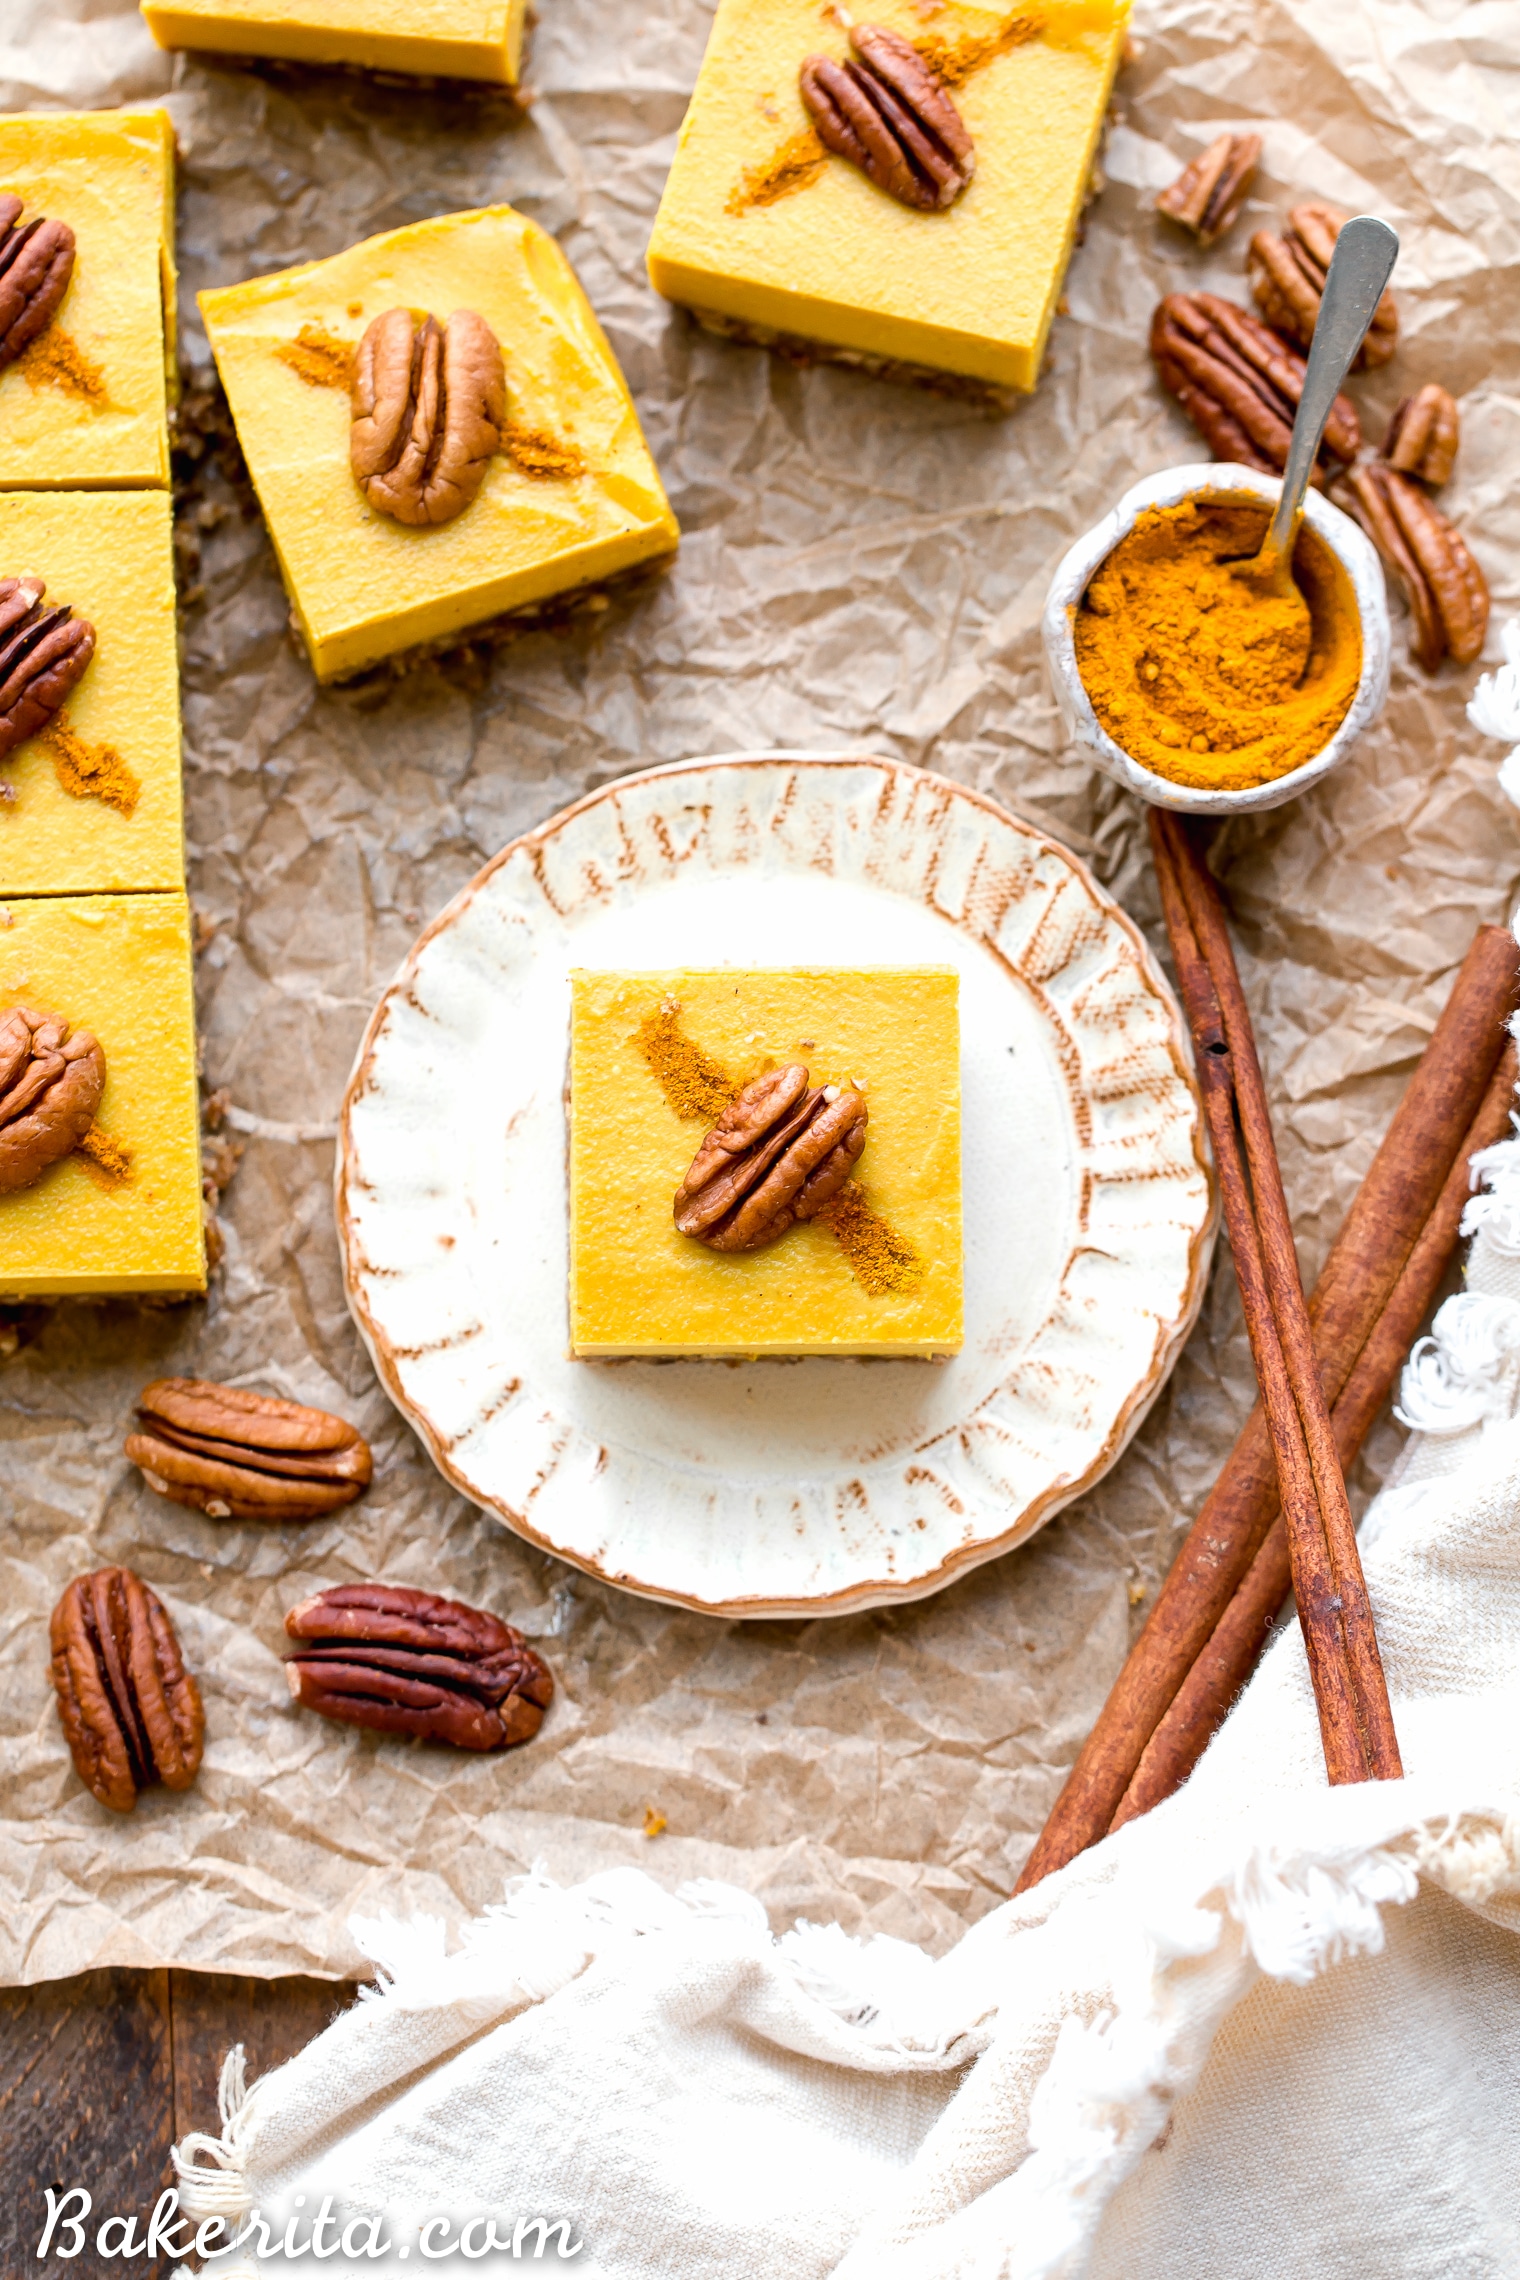 These No Bake Golden Milk Cheesecake Bars are a dessert that's loaded with the anti-inflammatory benefits of turmeric and the warmth and comfort of golden milk. They're deliciously spiced, gluten-free, paleo, vegan, and perfect for sharing.